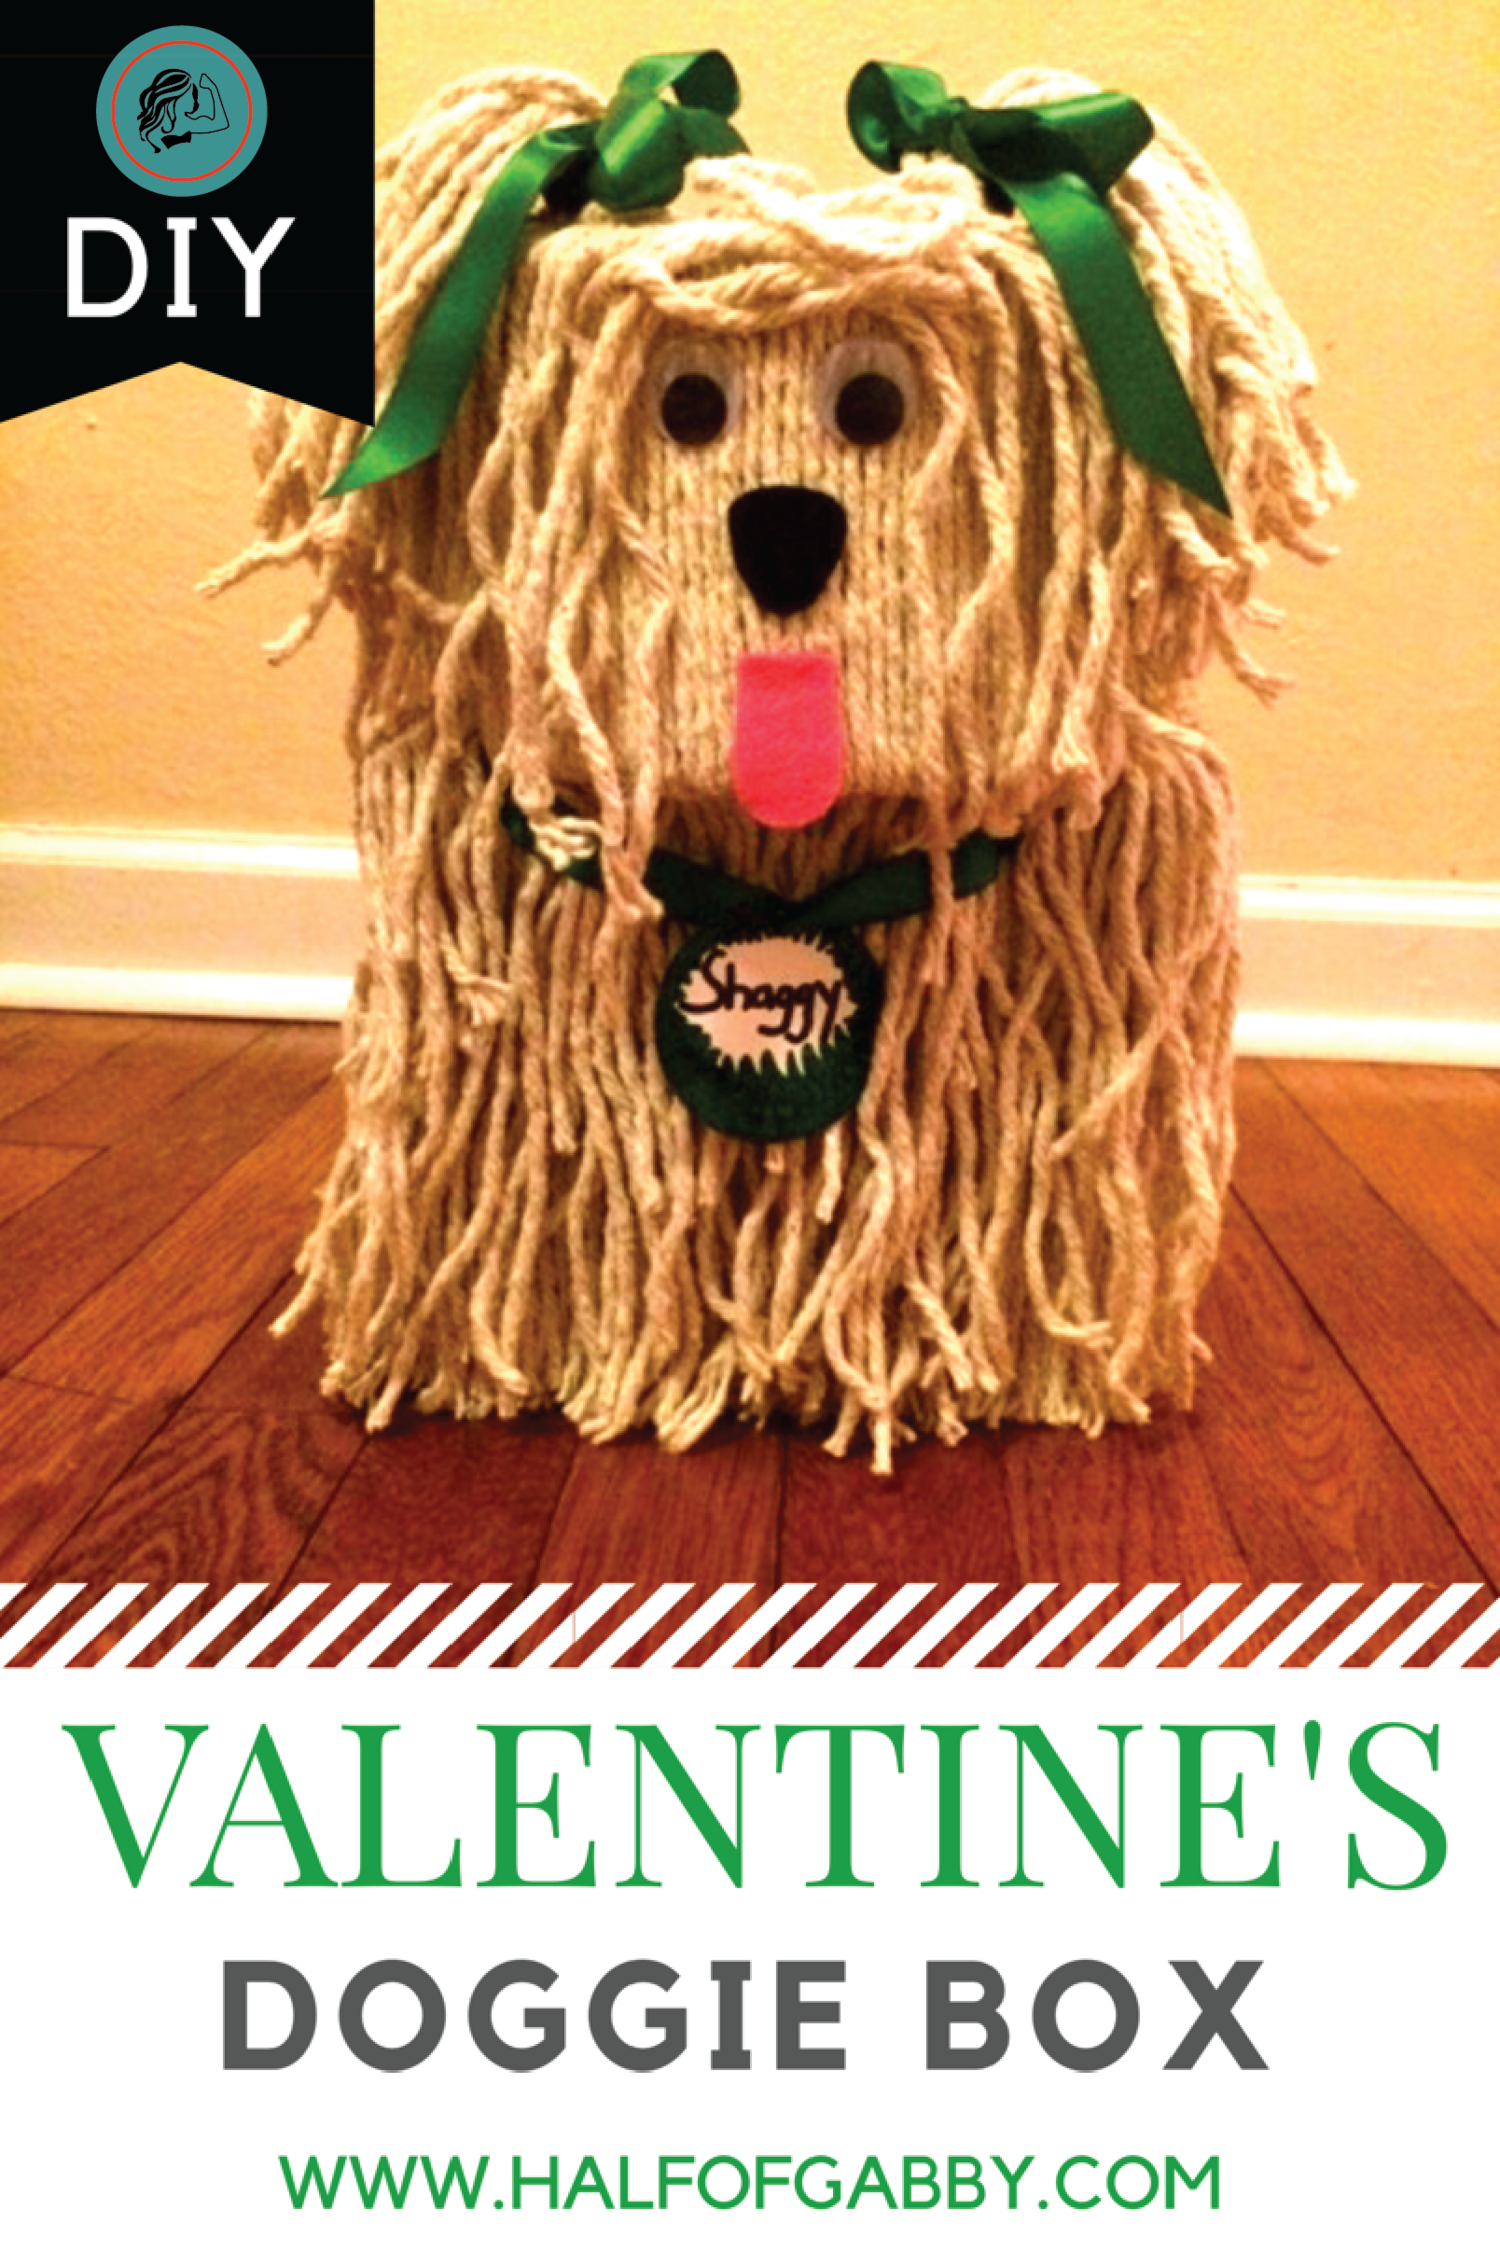 DOGGIE VALENTINE BOX: Printable Instructions Included! — Half of Gabby